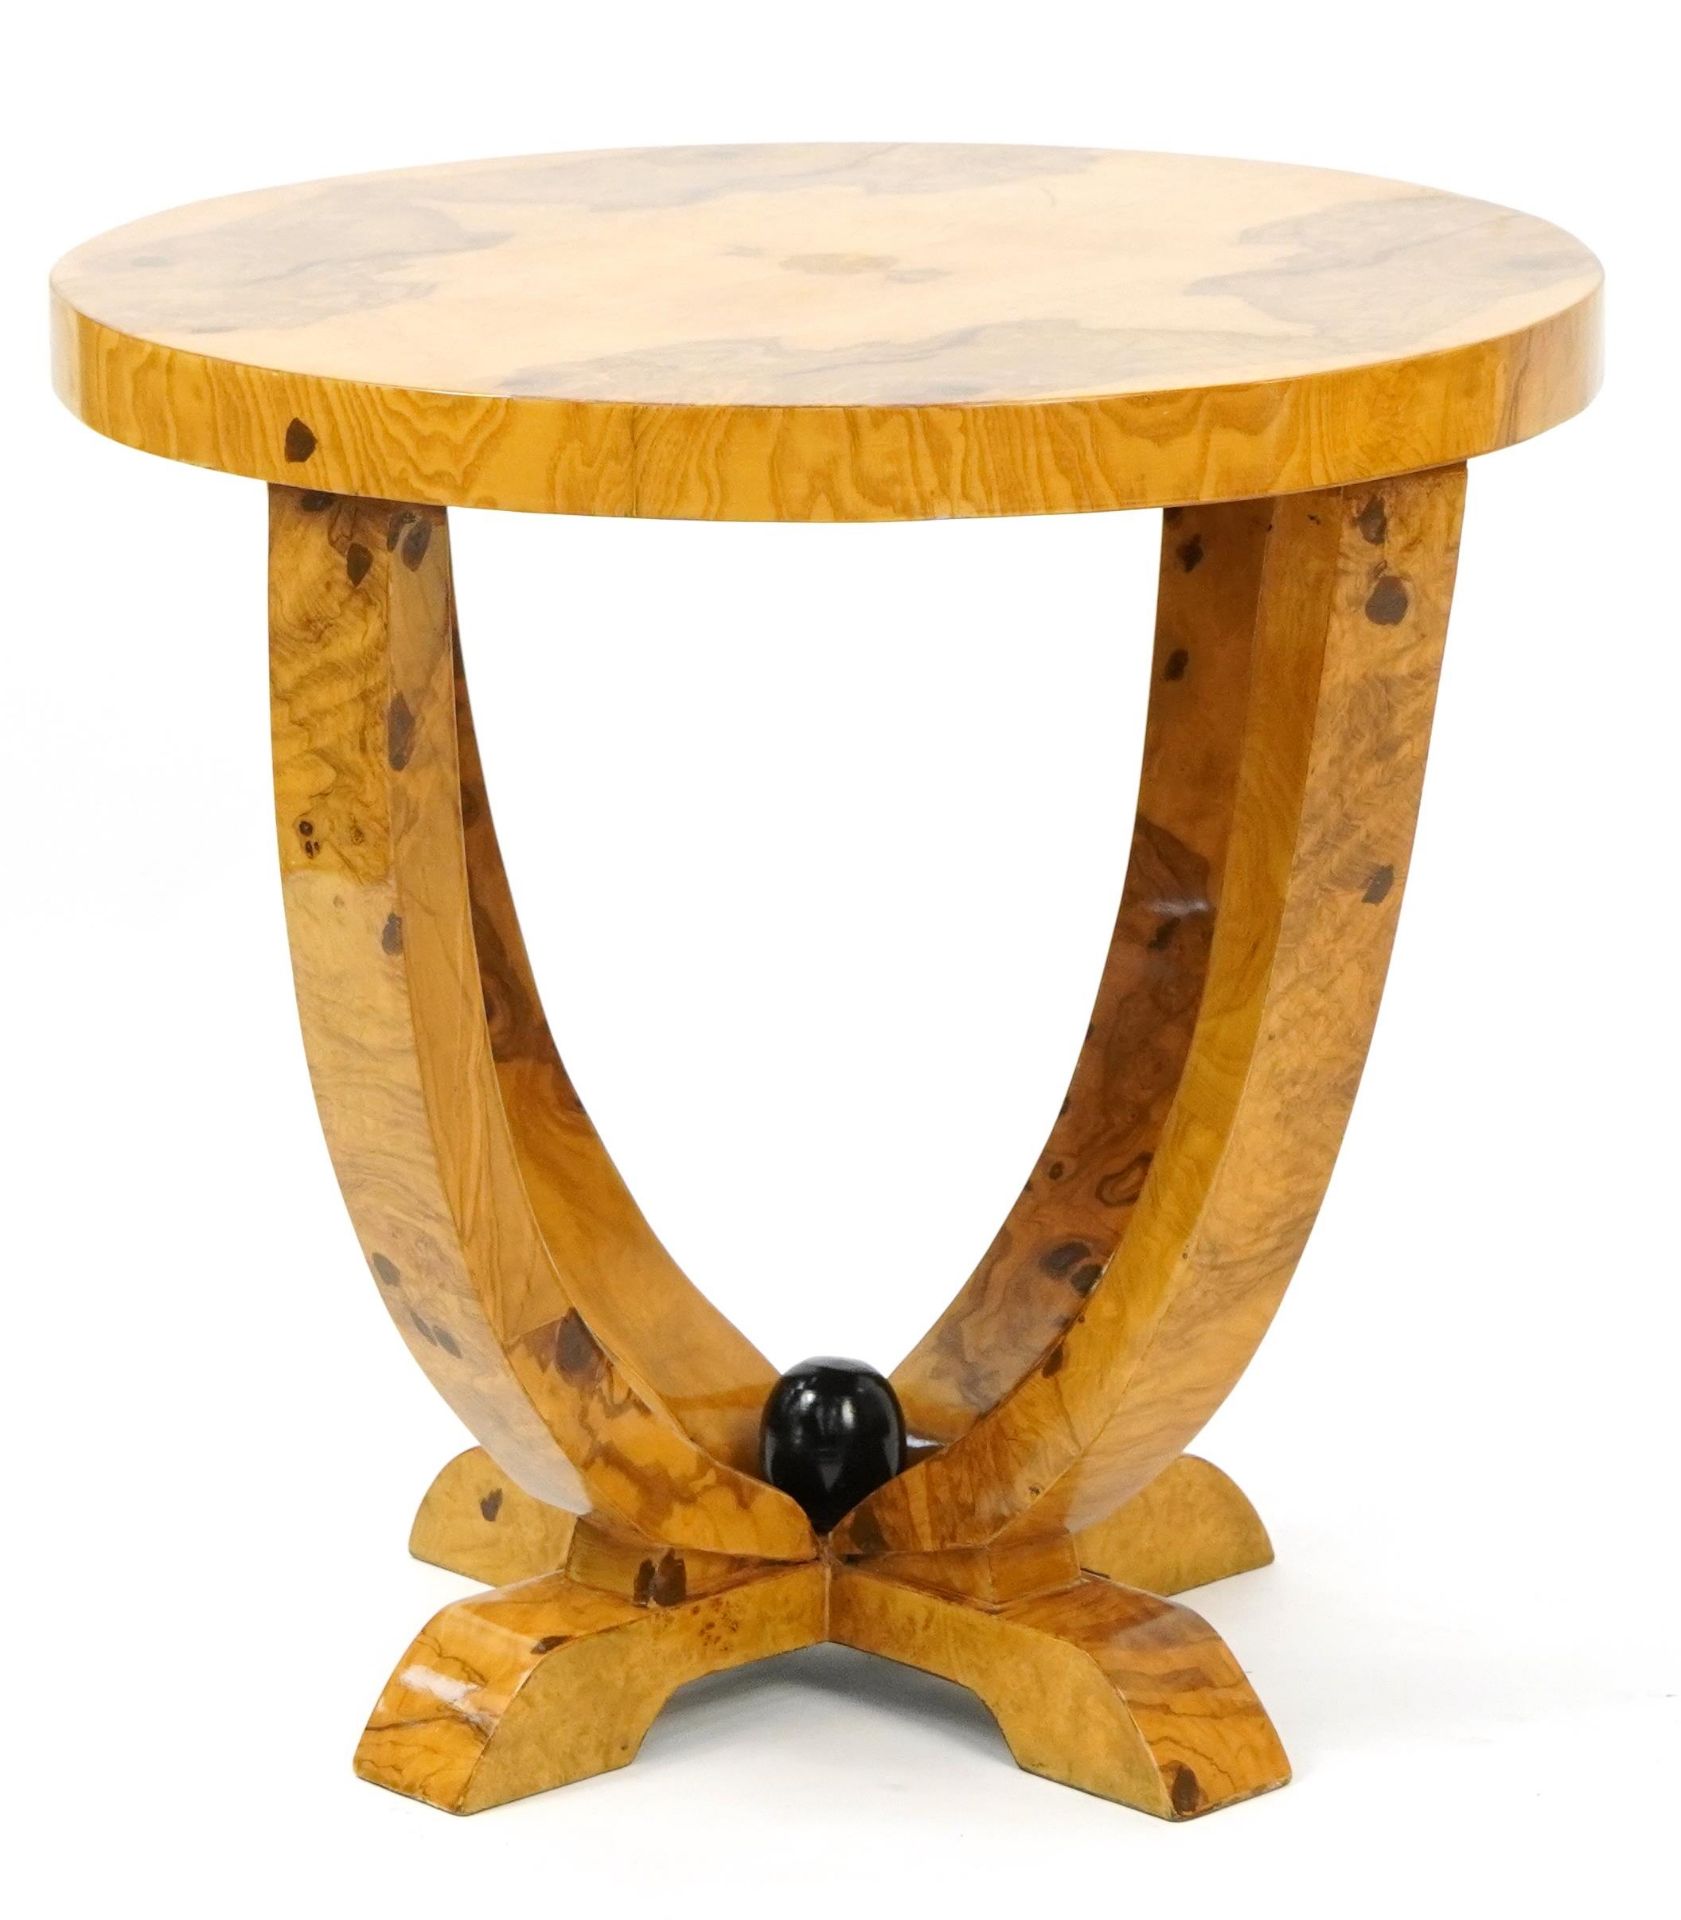 Art Deco style walnut effect circular occasional table, 55.5cm high x 58.5cm in diameter - Image 3 of 3